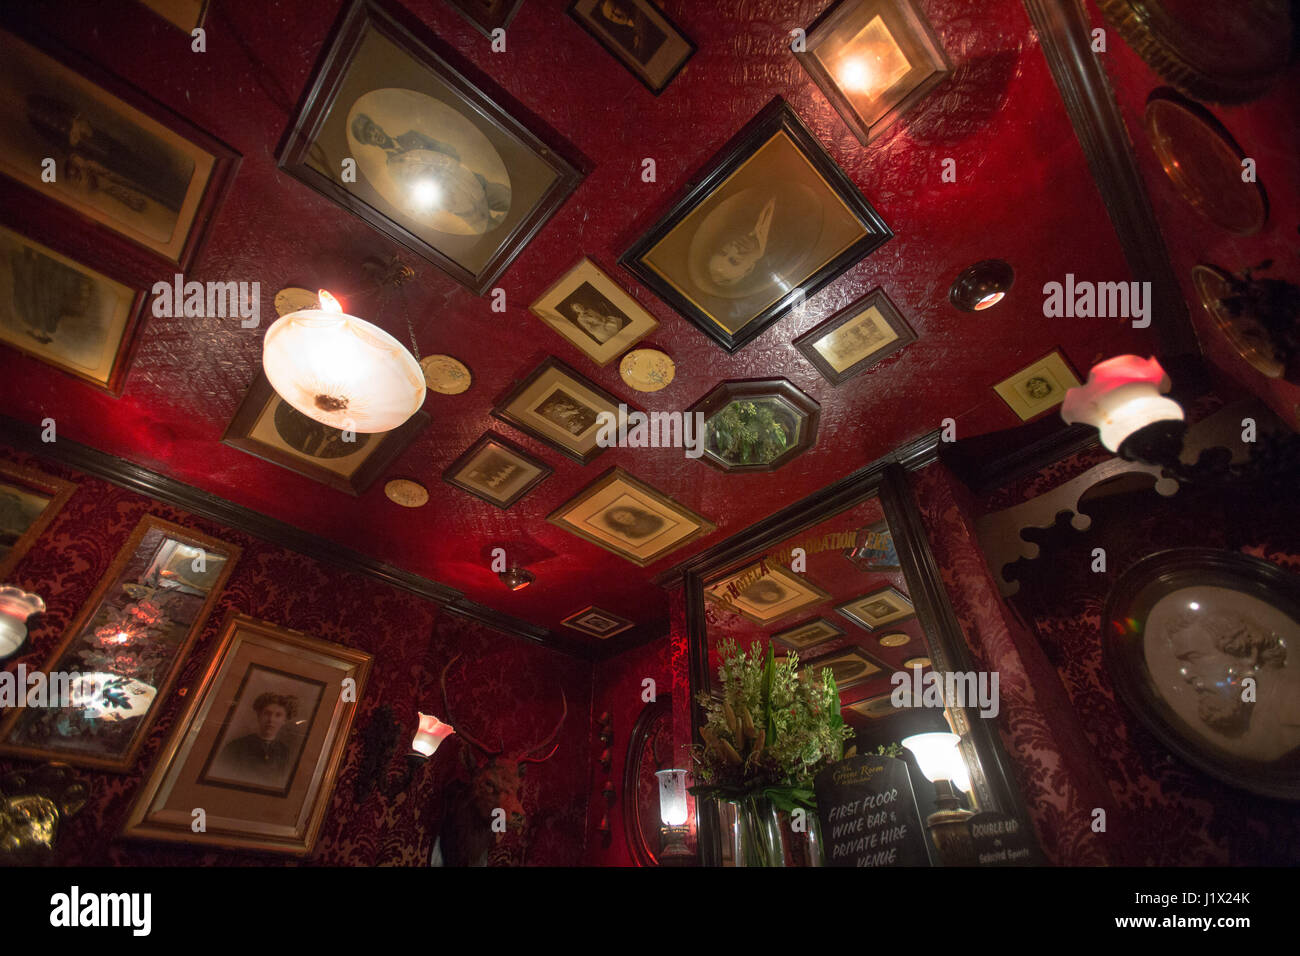 Ceiling inside The Cricketers pub in Brighton. Stock Photo